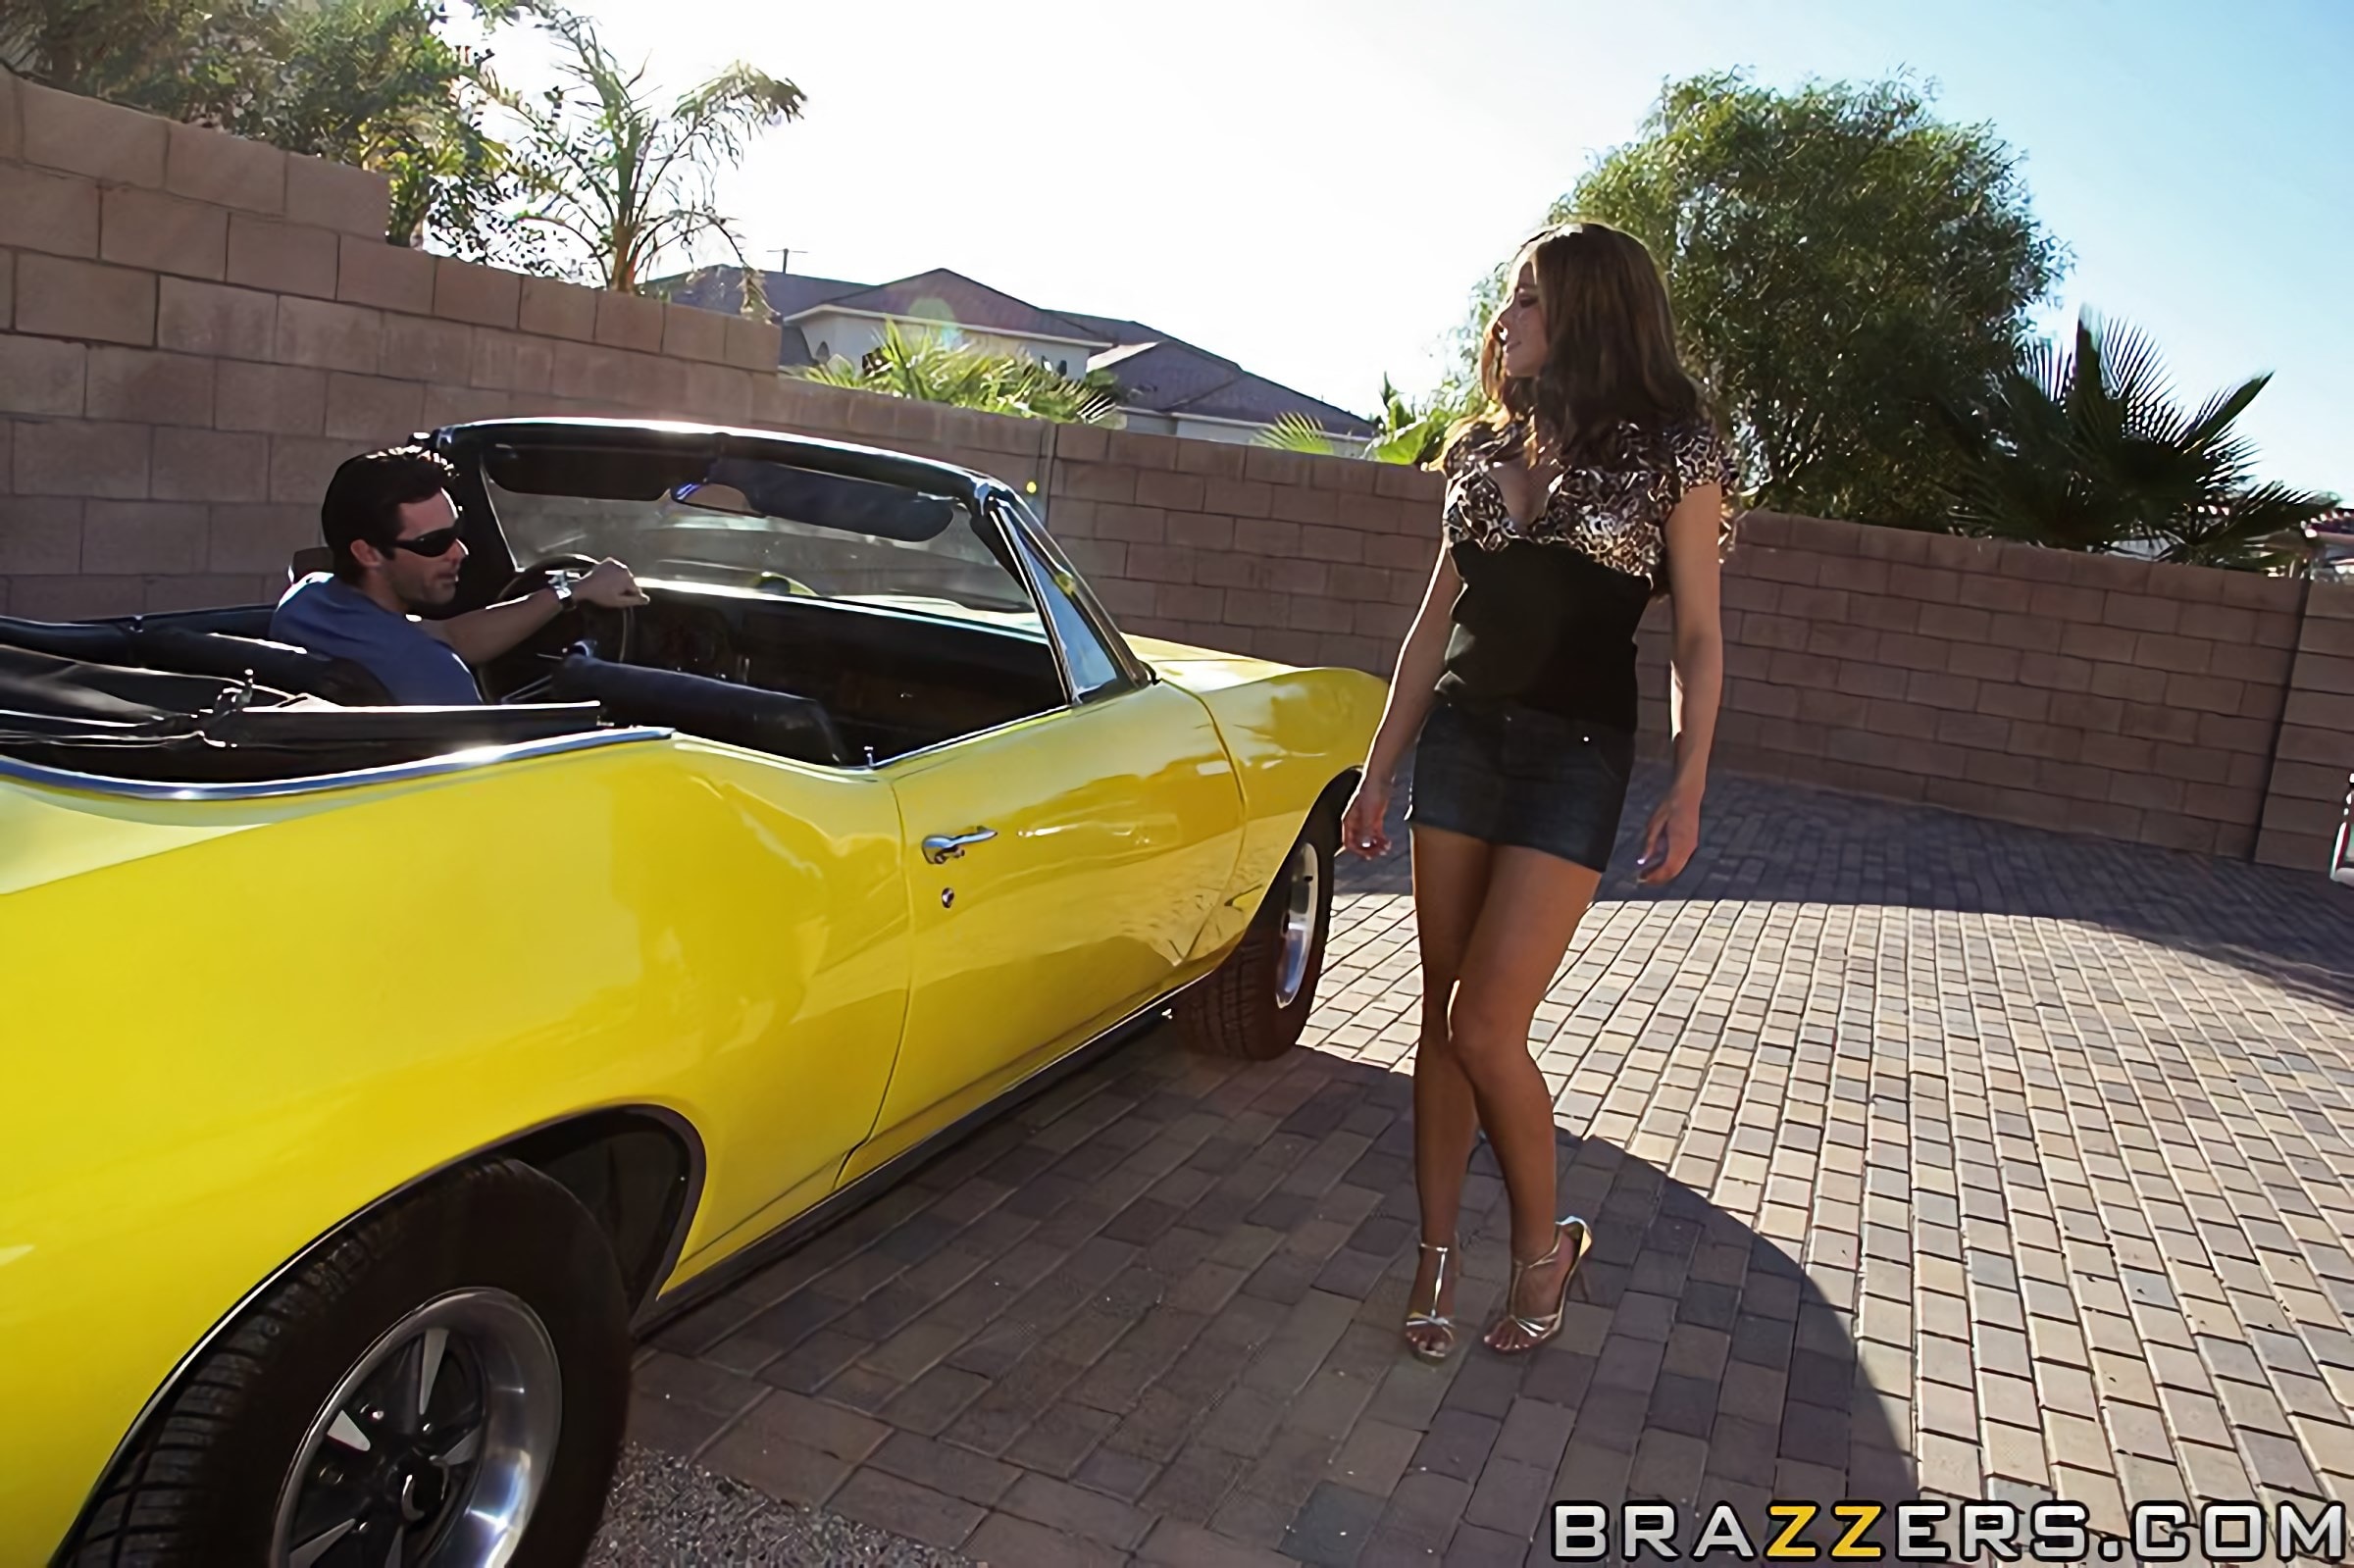 Brazzers 'You Wanna Go For A Ride' starring Hunter Bryce (Photo 5)